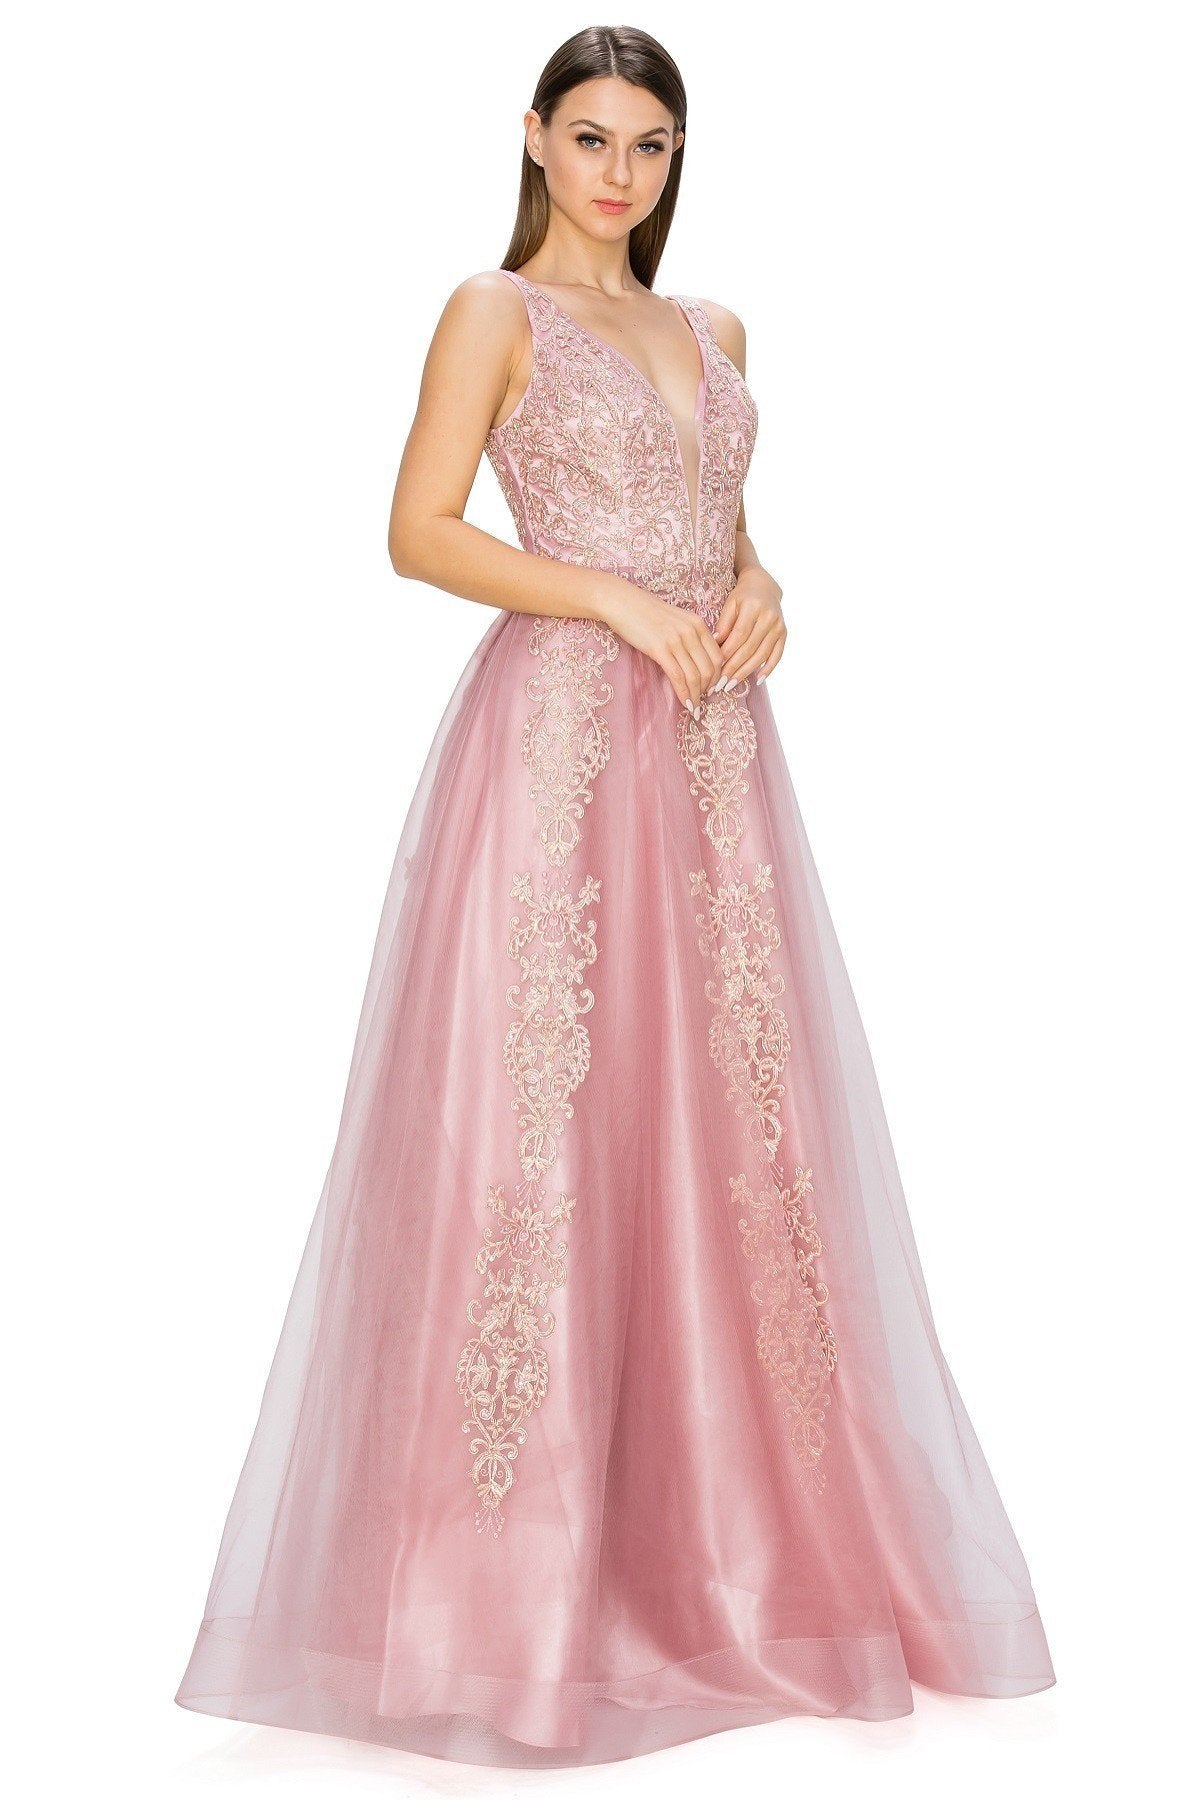 Dusty-Rose Floral Glitter Tulle Dress by Cinderella Couture USA AS8029J-DROSE - Special Occasion/Curves